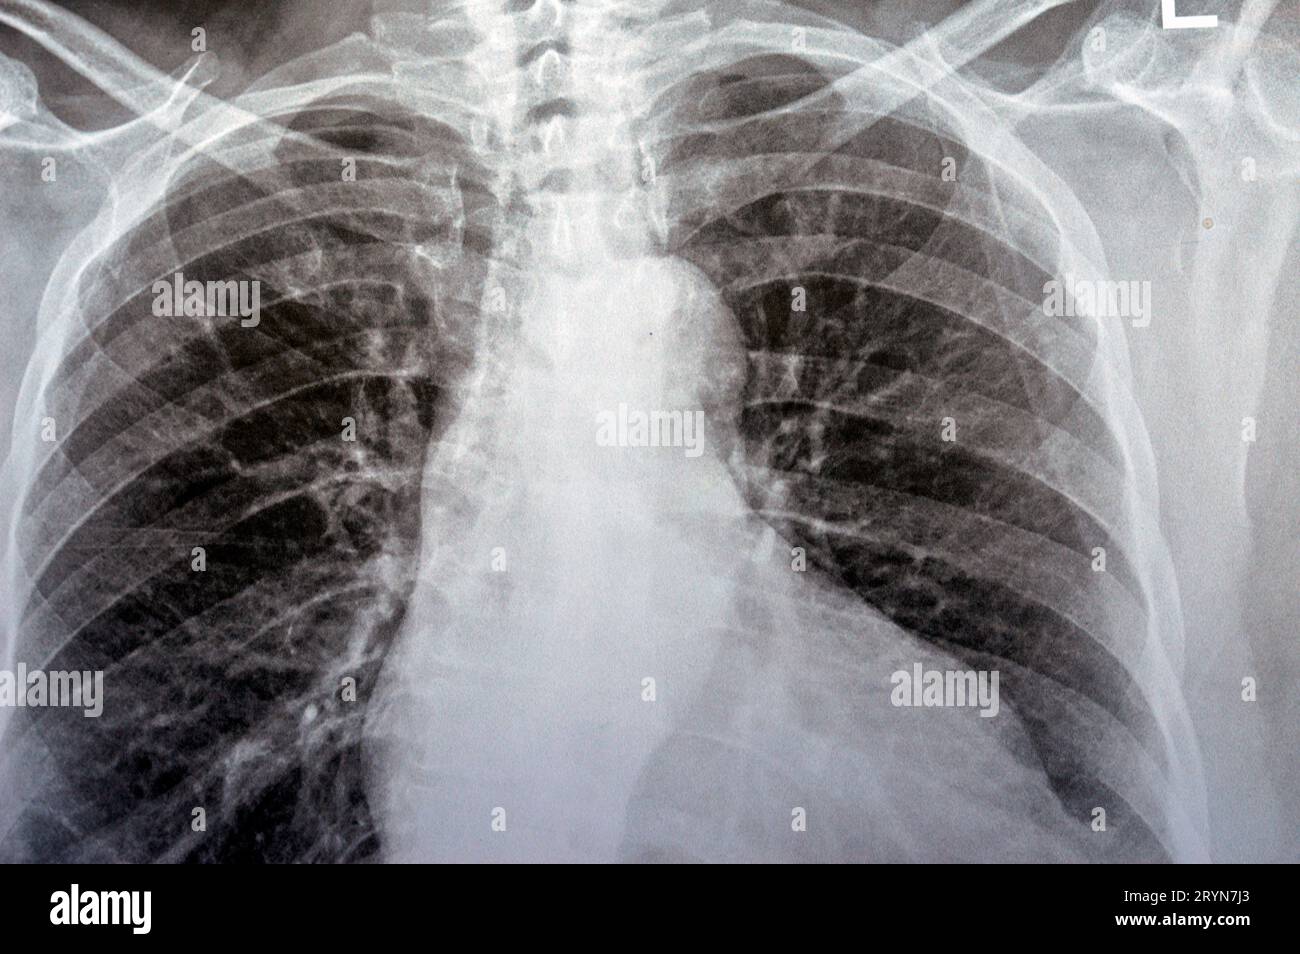 Plain x ray chest of an old woman with almost normal study of bones, lungs and heart, normal chest cavity, ribs and wall, no signs of white patches or Stock Photo